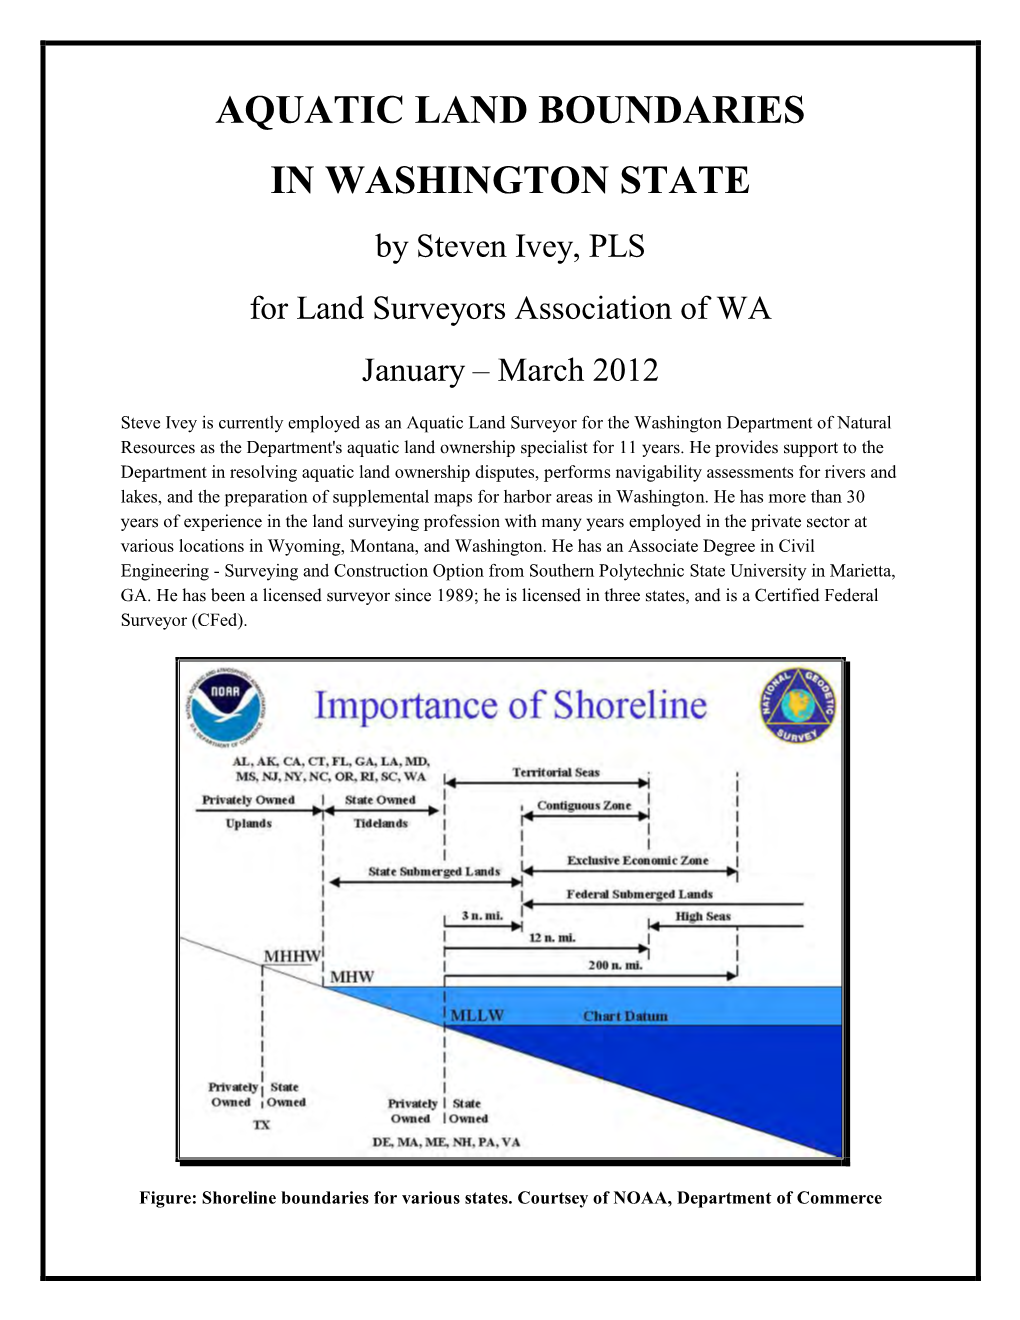 AQUATIC LAND BOUNDARIES in WASHINGTON STATE by Steven Ivey, PLS for Land Surveyors Association of WA January – March 2012